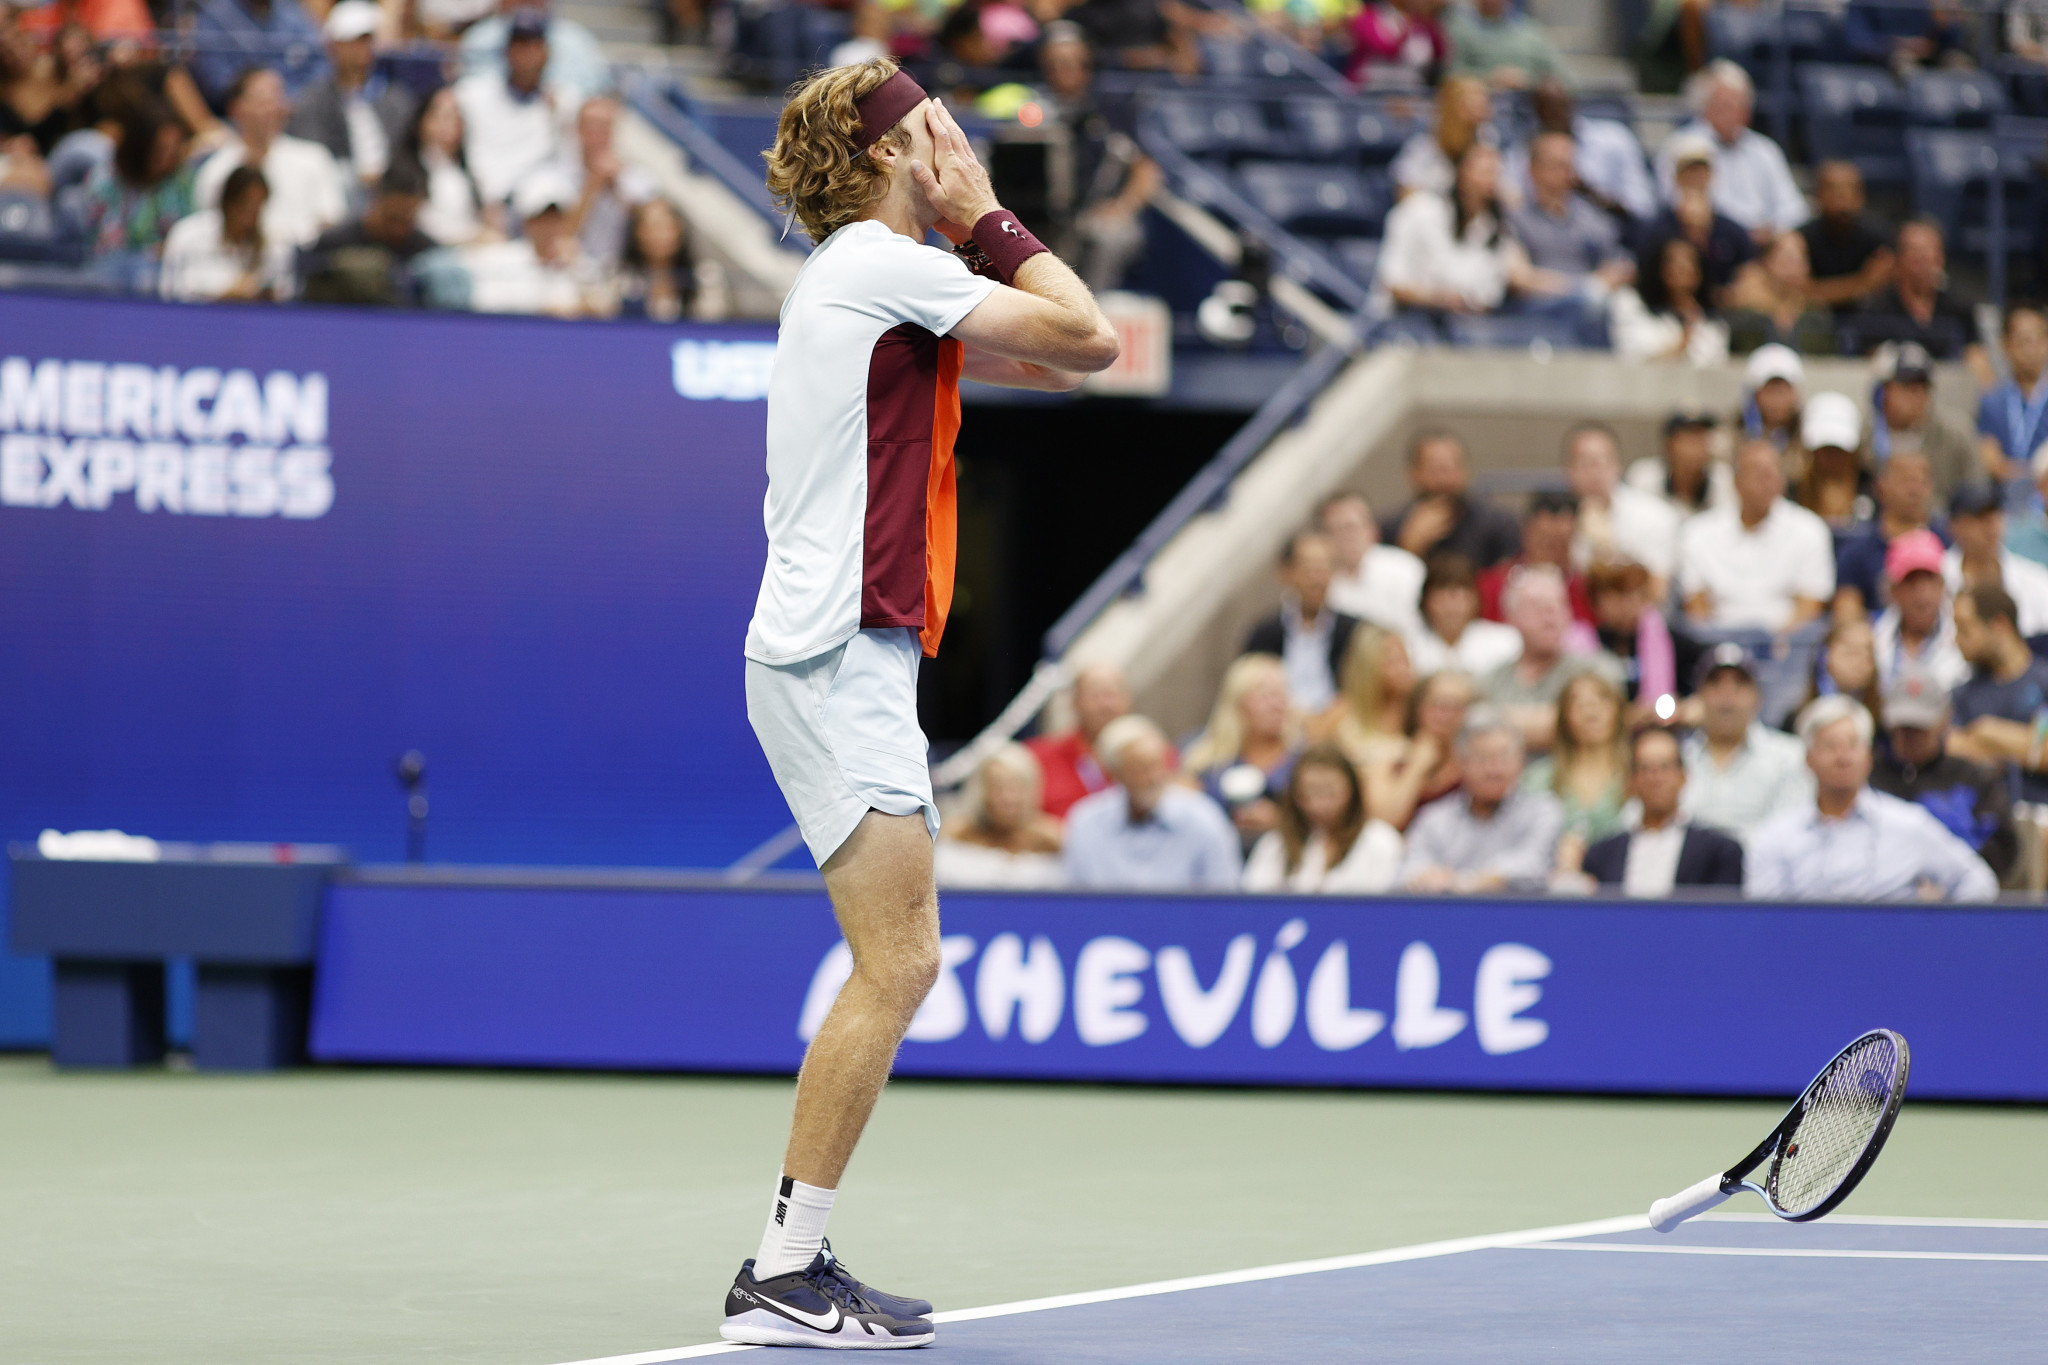 Andrey Rublev drops his racket in frustration during his match with Tiafoe ©Getty Images